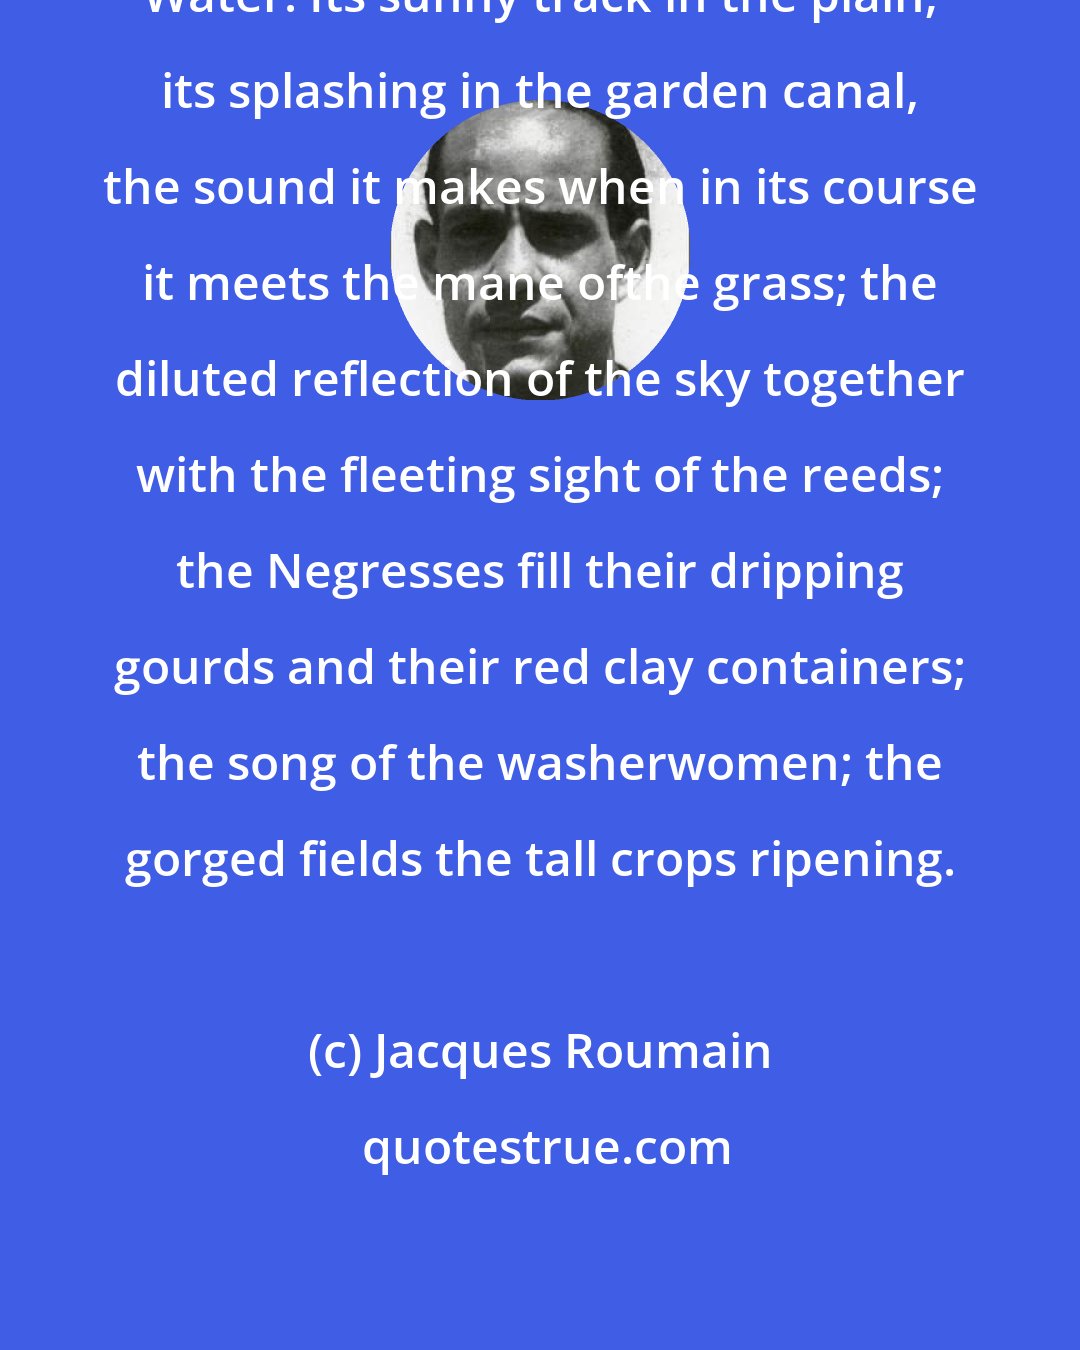 Jacques Roumain: Water. Its sunny track in the plain; its splashing in the garden canal, the sound it makes when in its course it meets the mane ofthe grass; the diluted reflection of the sky together with the fleeting sight of the reeds; the Negresses fill their dripping gourds and their red clay containers; the song of the washerwomen; the gorged fields the tall crops ripening.